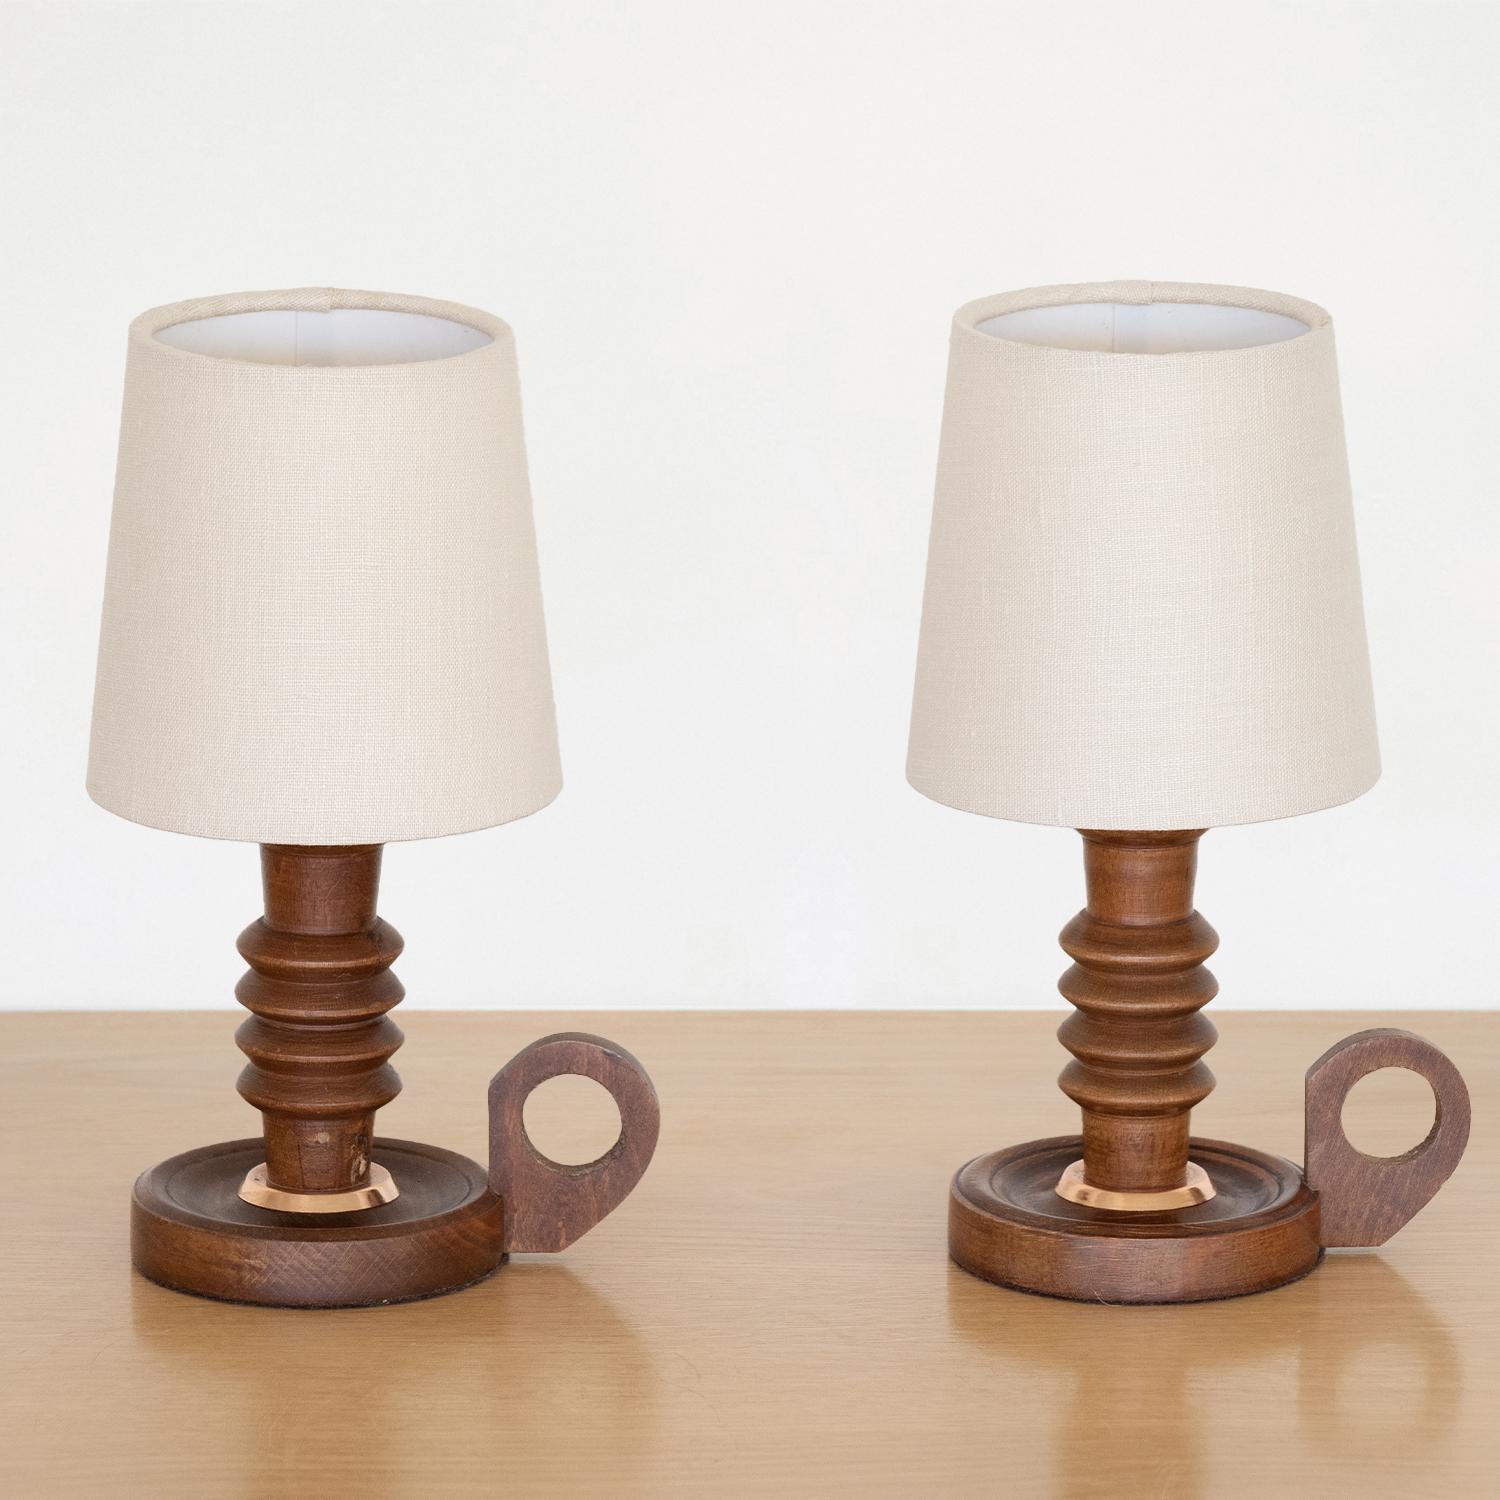 Petite wood table lamp from France, 1940s. Beautiful carved wood stem forms with circular base and small loop handle. All original wood finish. New linen shade and newly re-wired. Two available. Sold individually. Takes one E12 base bulb, 25 W or